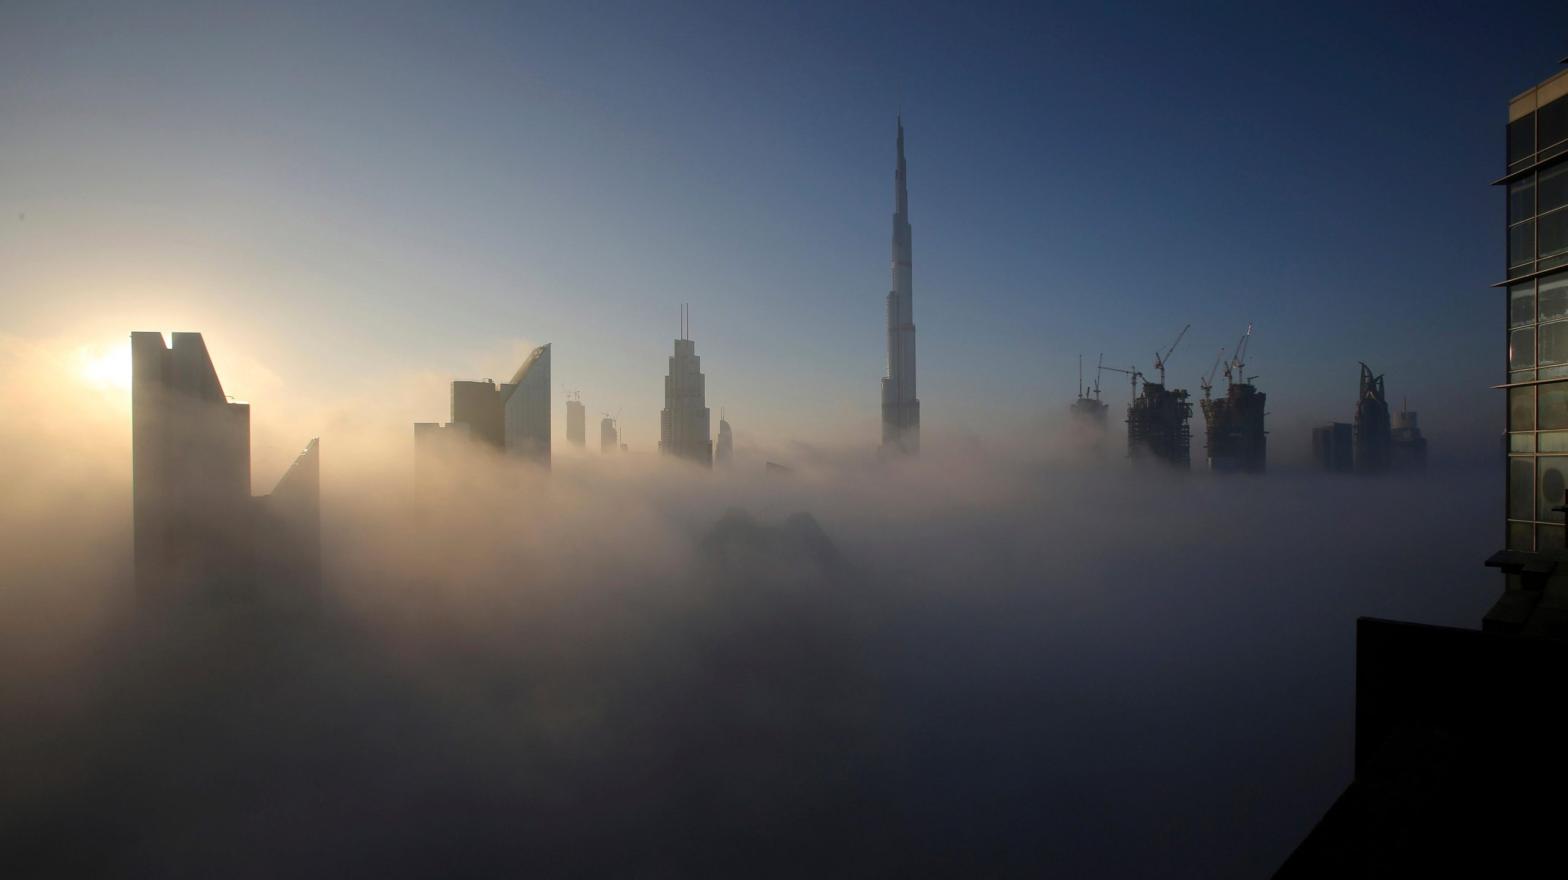 The sun rises over the city skyline with the Burj Khalifa, the world's tallest building at the backdrop, seen from a balcony on the 42nd floor of a hotel on a foggy day in Dubai, United Arab Emirates. (Photo: Kamran Jebreili, AP)